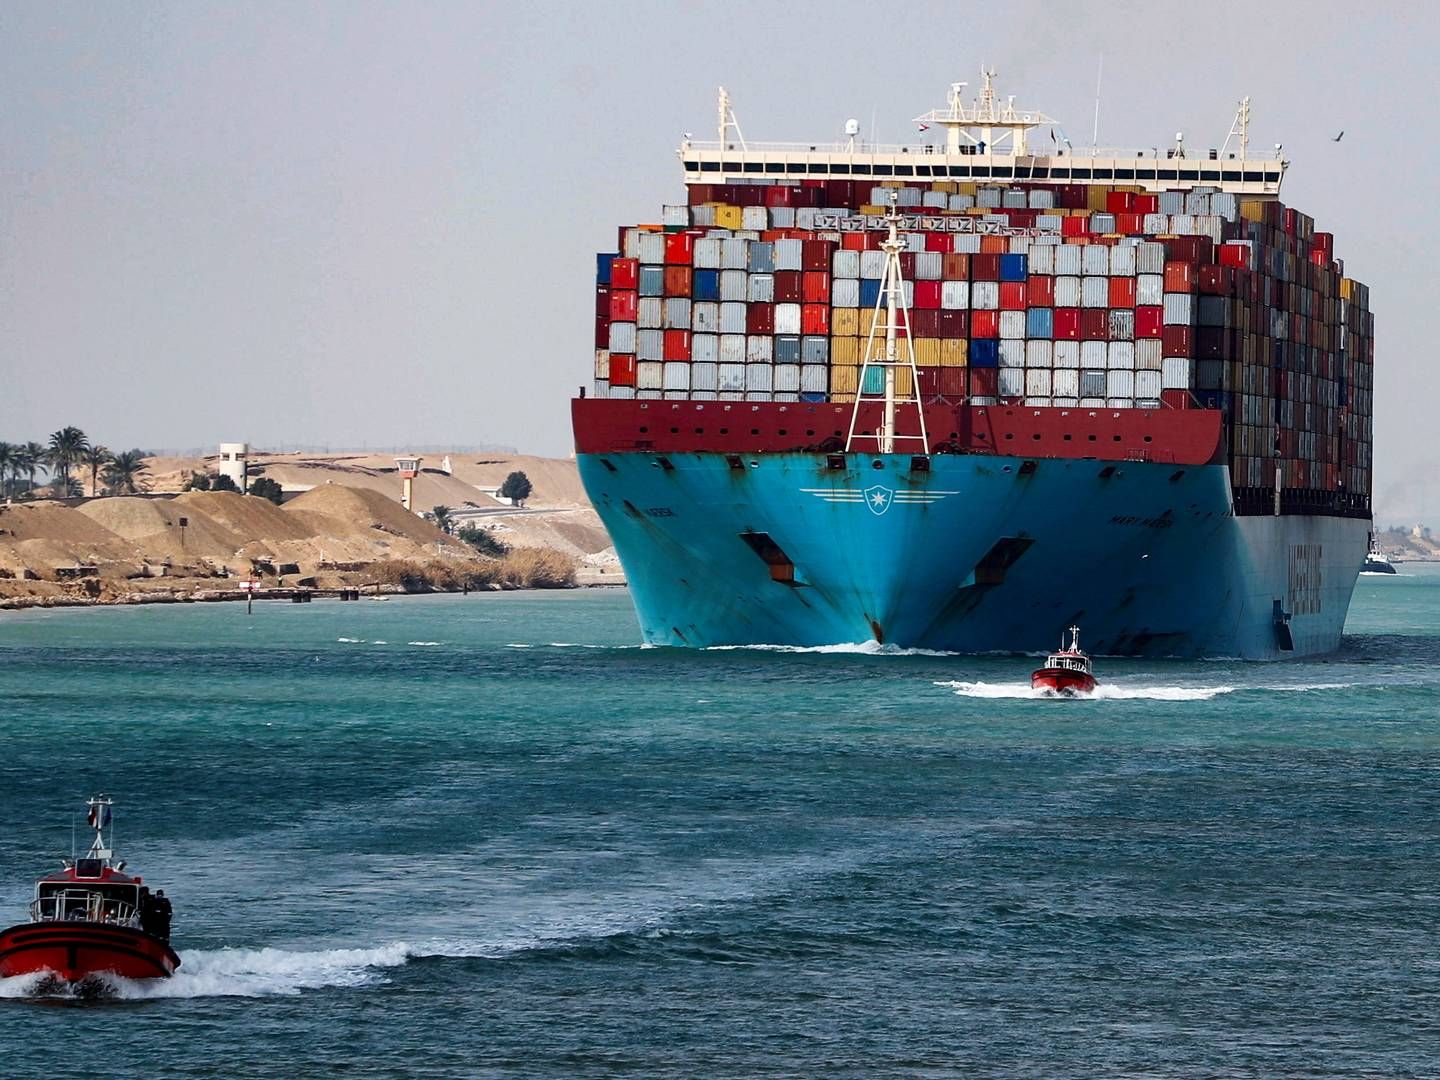 Maersk and Hapag-Lloyd will not proceed through the Suez Canal until the US-led coalition can ensure complete security, the two shipping companies tell ShippingWatch. | Photo: Mohamed Abd El Ghany/Reuters/Ritzau Scanpix